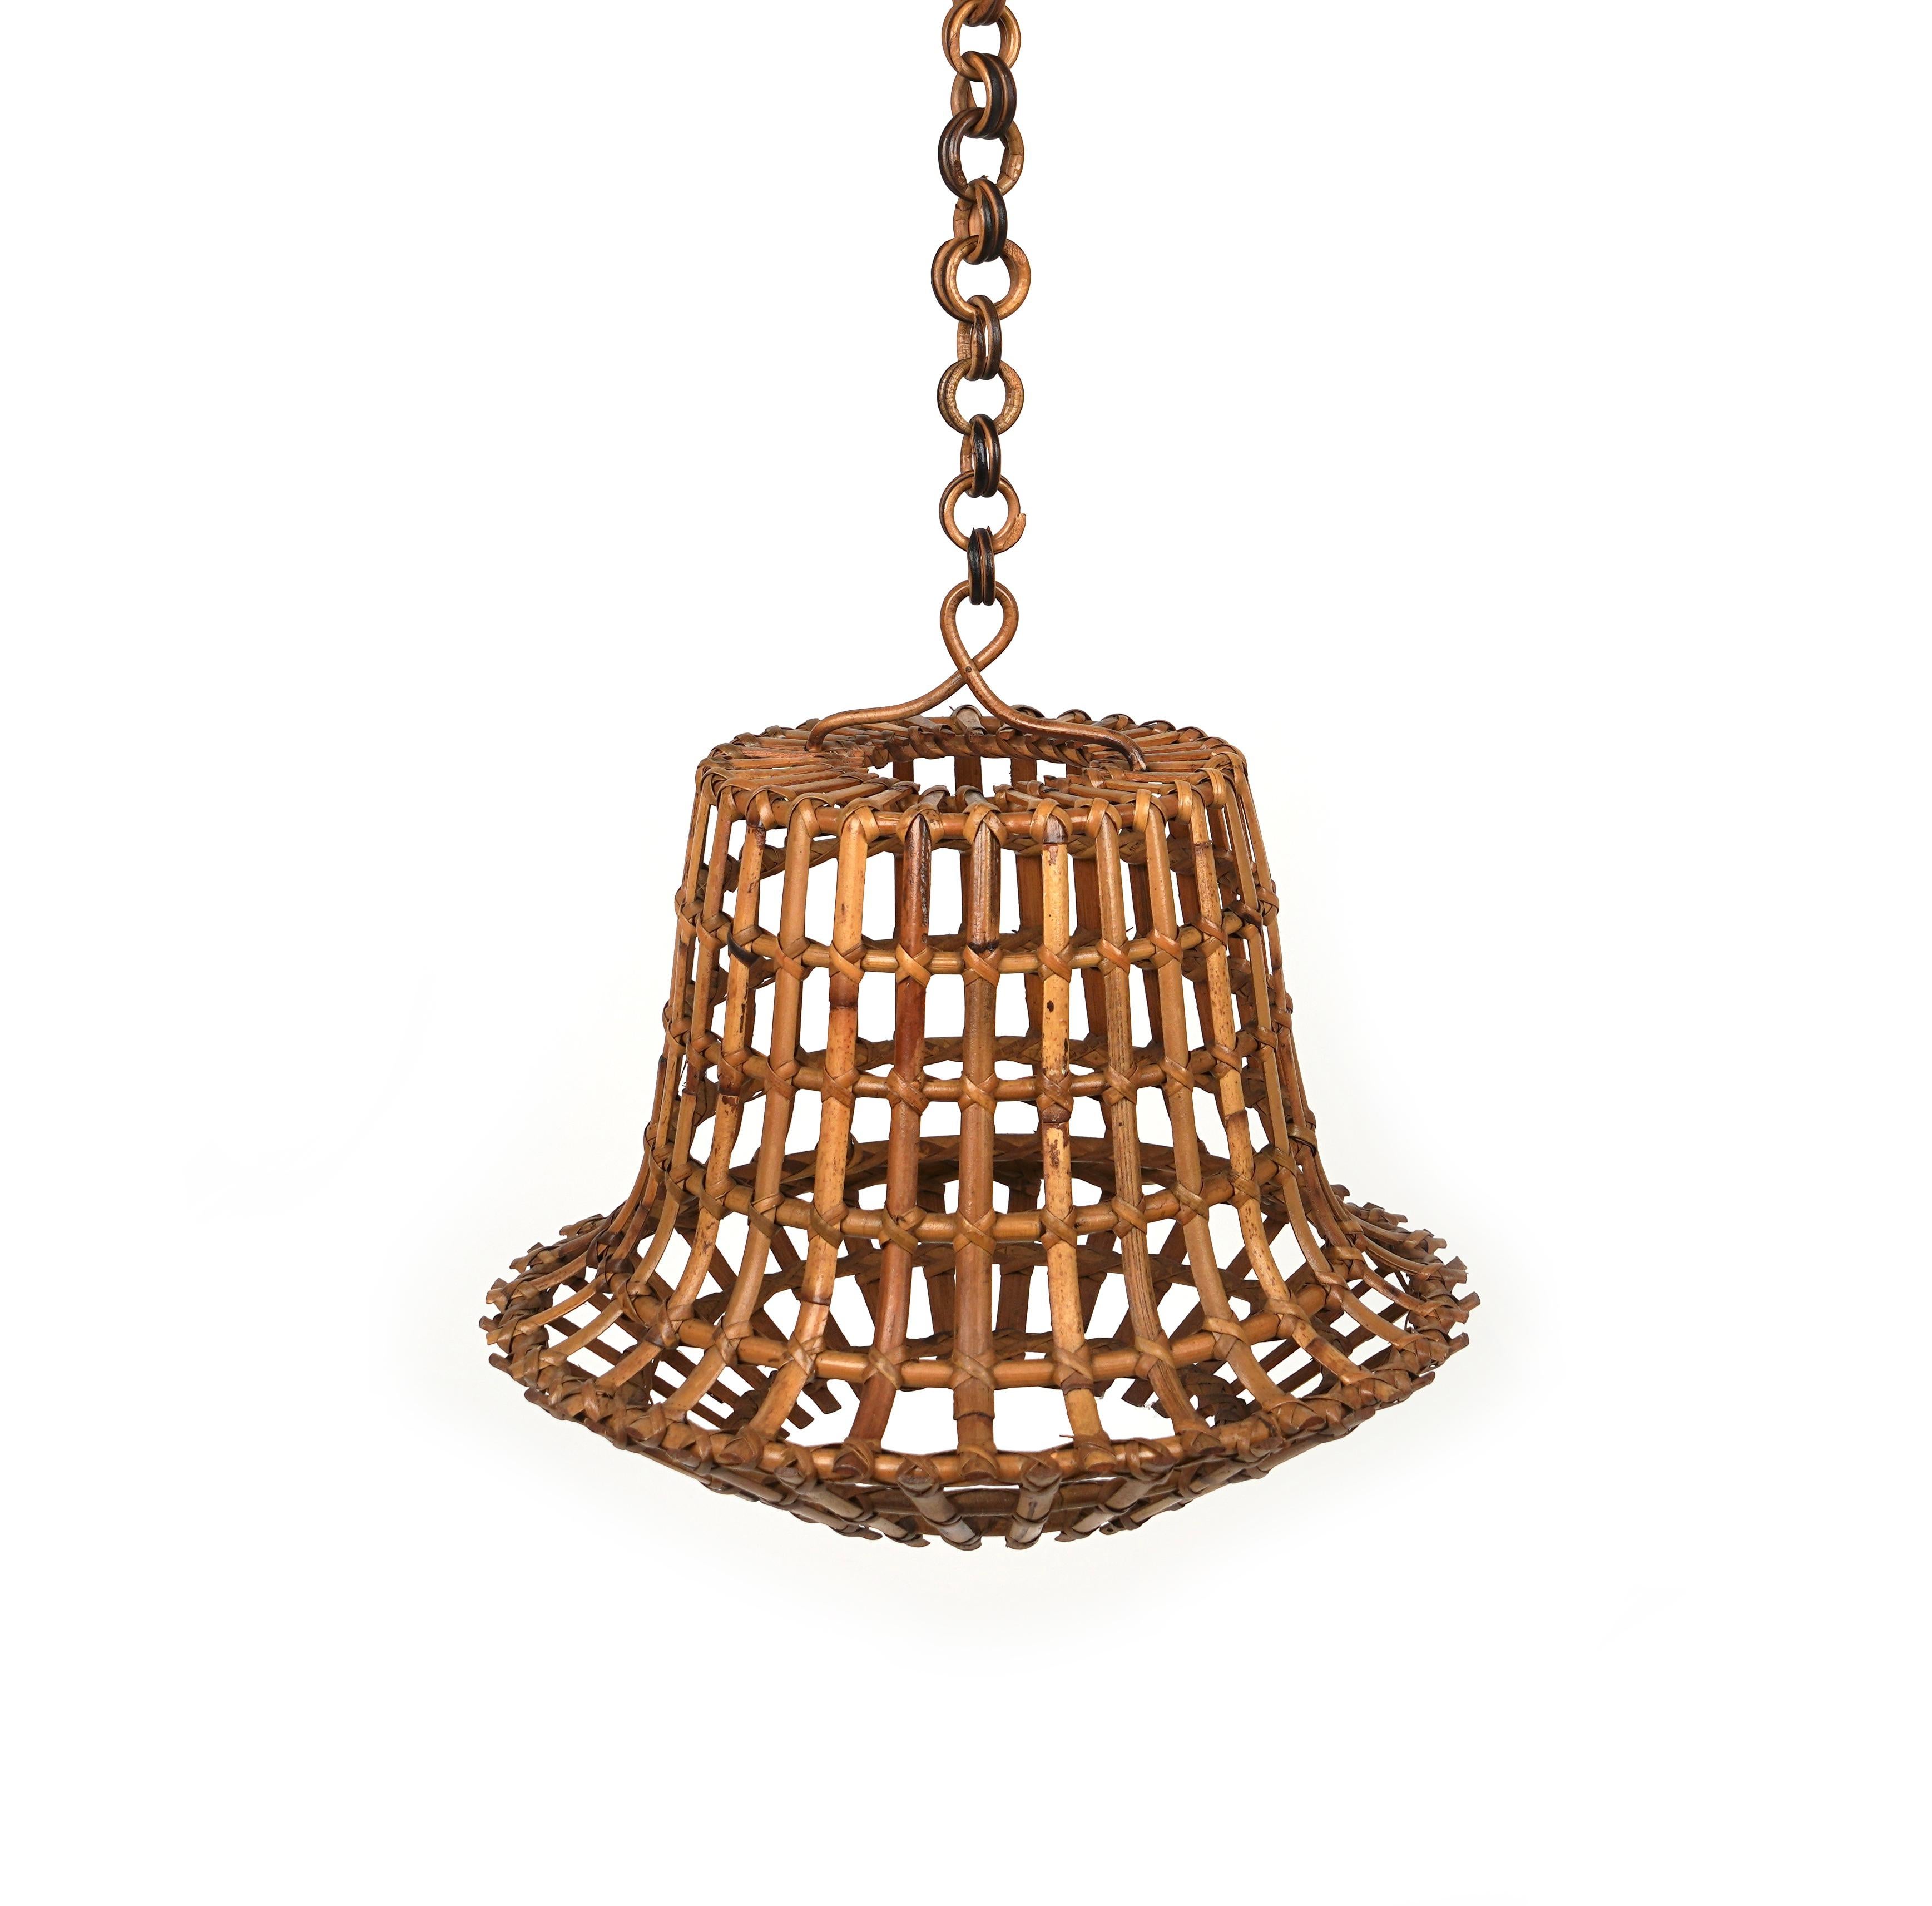 Italian Midcentury Bamboo and Rattan Chandelier Louis Sognot Style, Italy 1960s